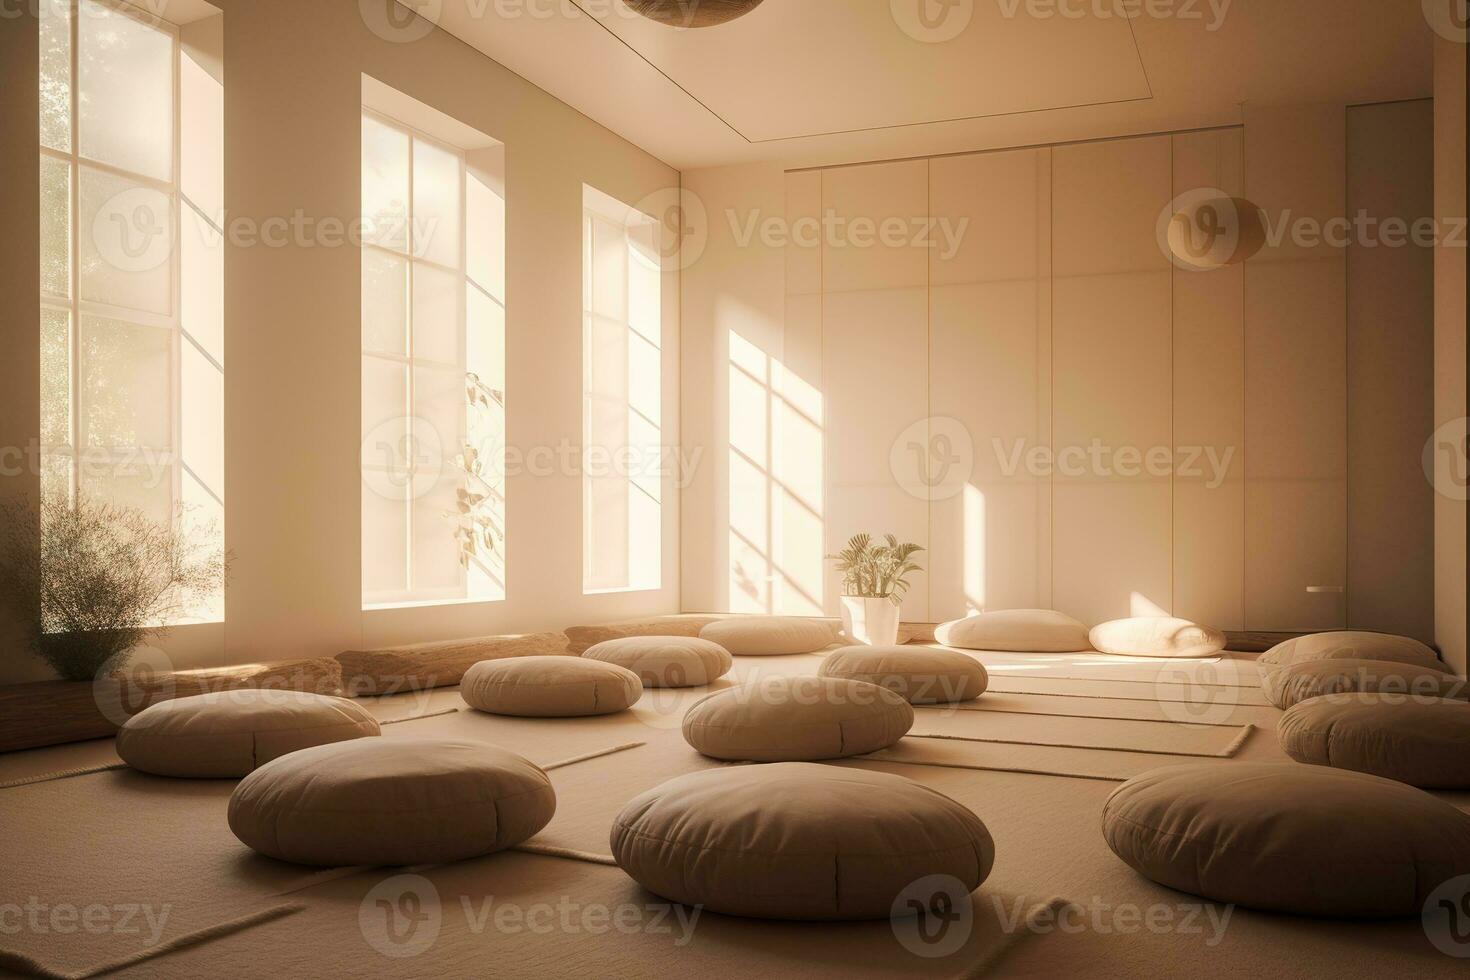 A peaceful image of a meditation room. The image could show a quiet room with people sitting on cushions and meditating. Muted color palette to create a sense of tranquility. Generative AI photo